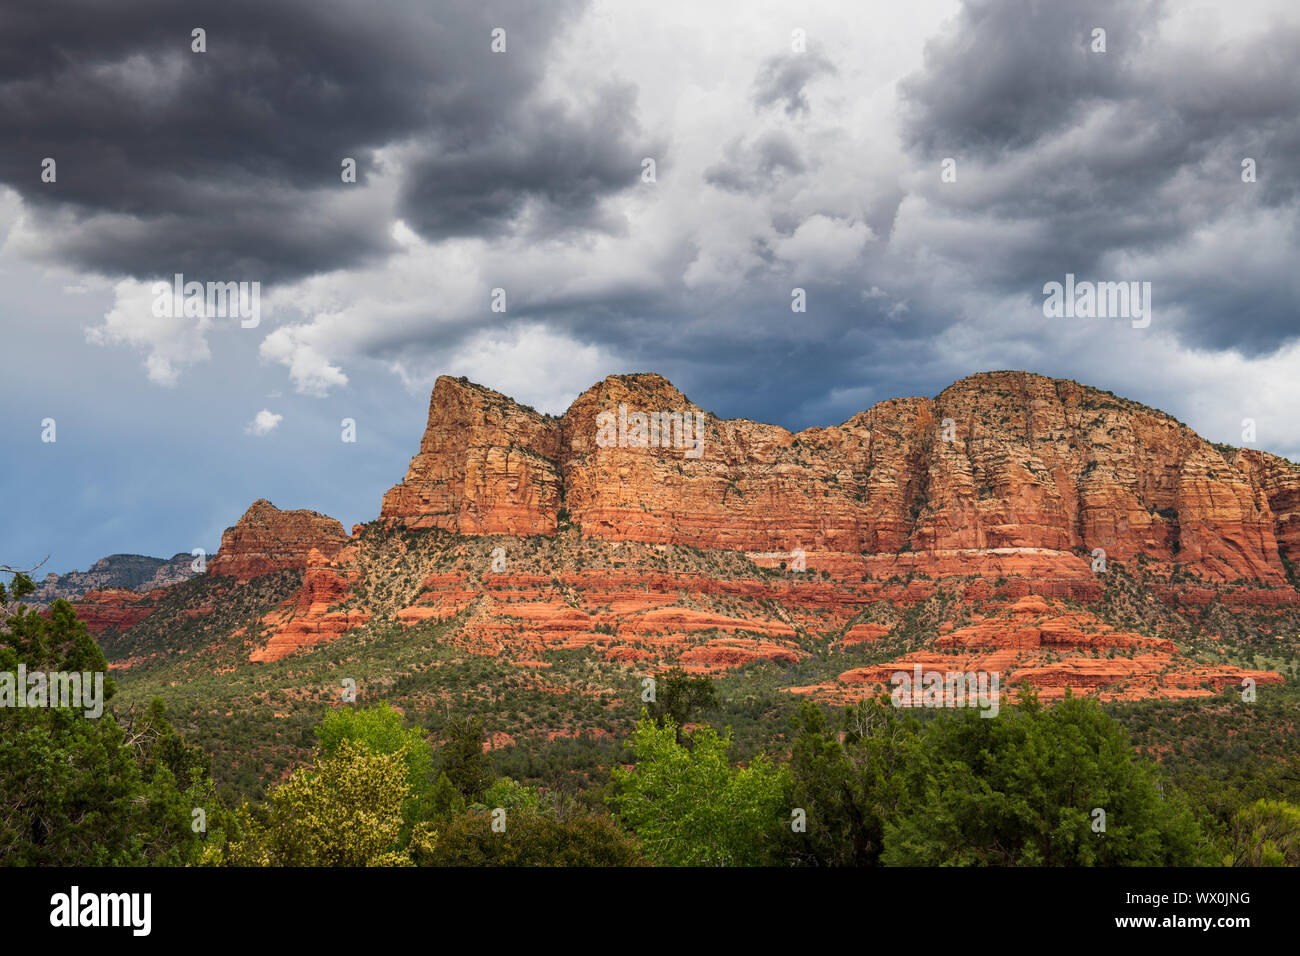 Moody sky over the Red-Rock buttes, Sedona, Arizona, United States of America, North America Stock Photo